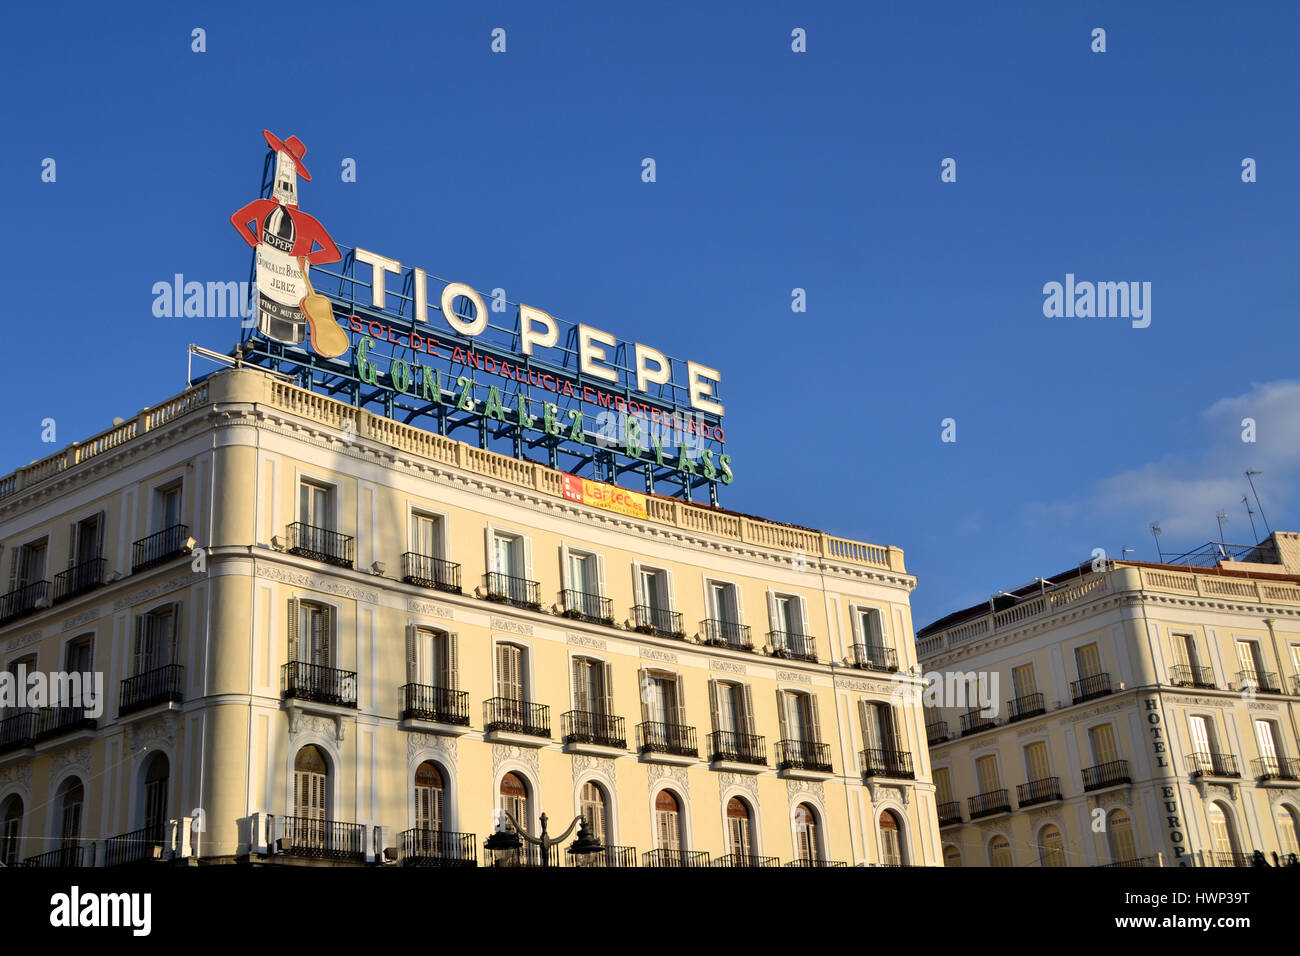 Pepe Brand High Resolution Stock Photography and Images - Alamy